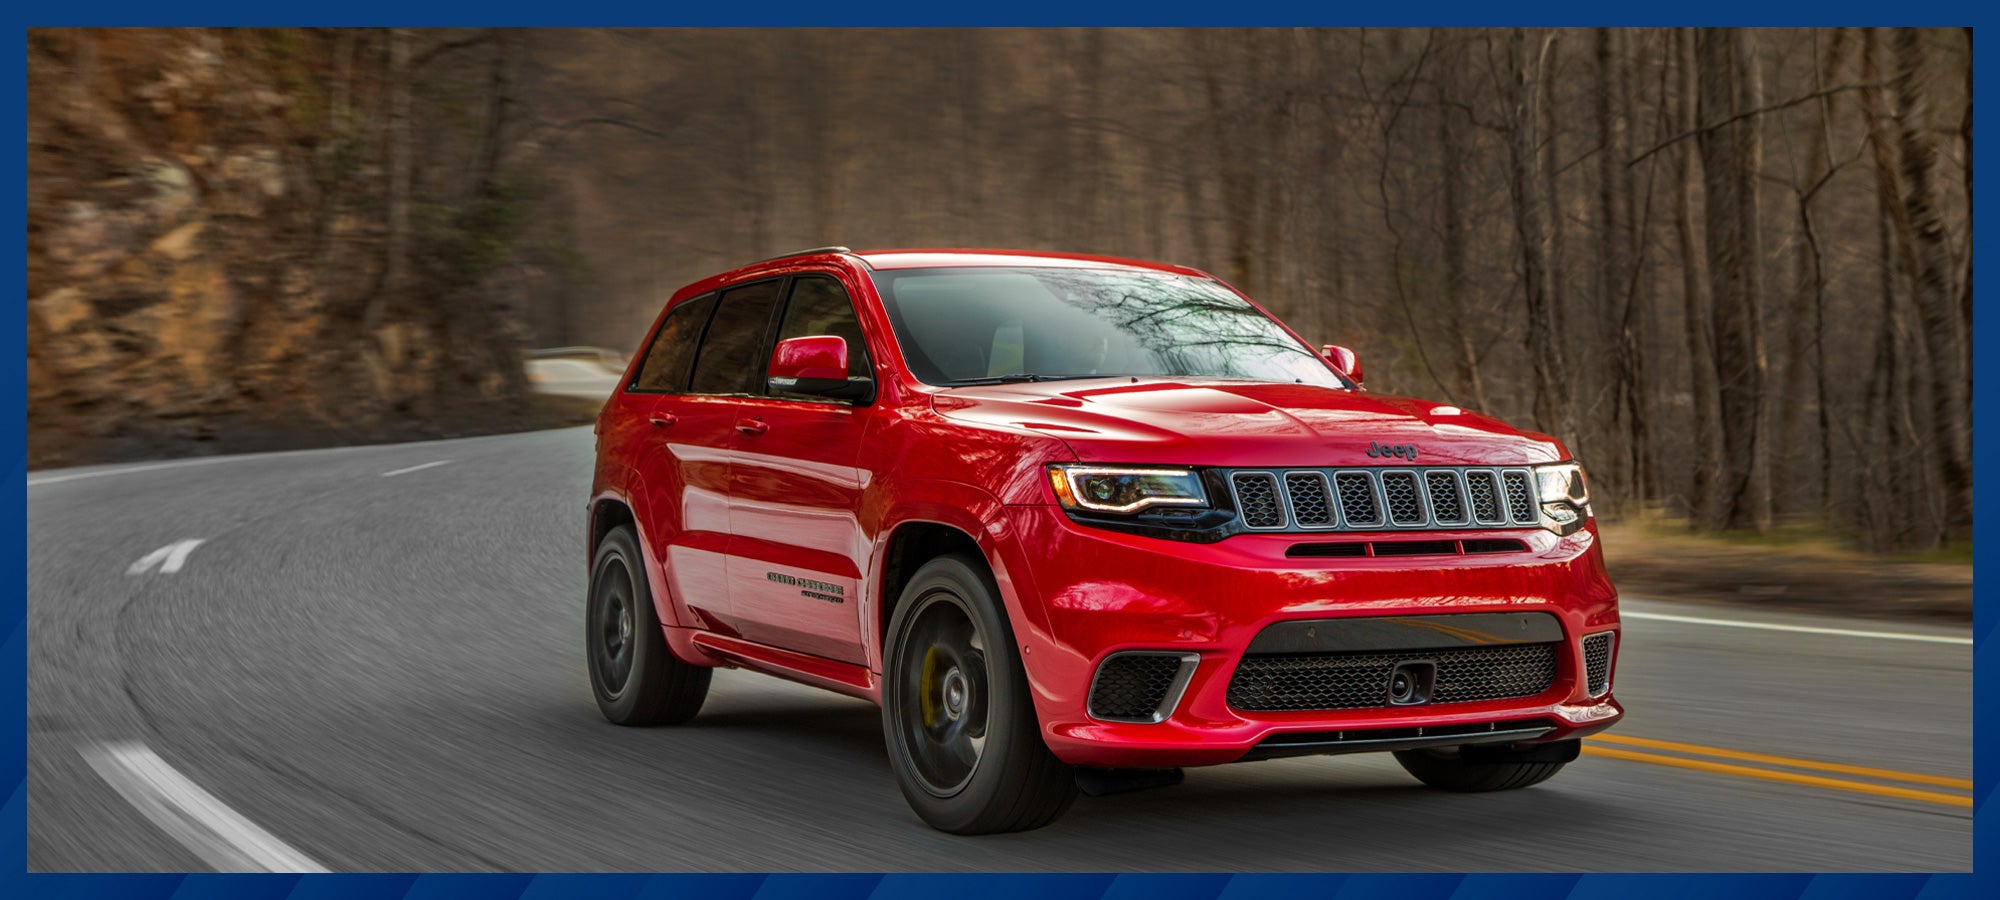 Used Jeep Grand Cherokee in Prince Frederick, MD